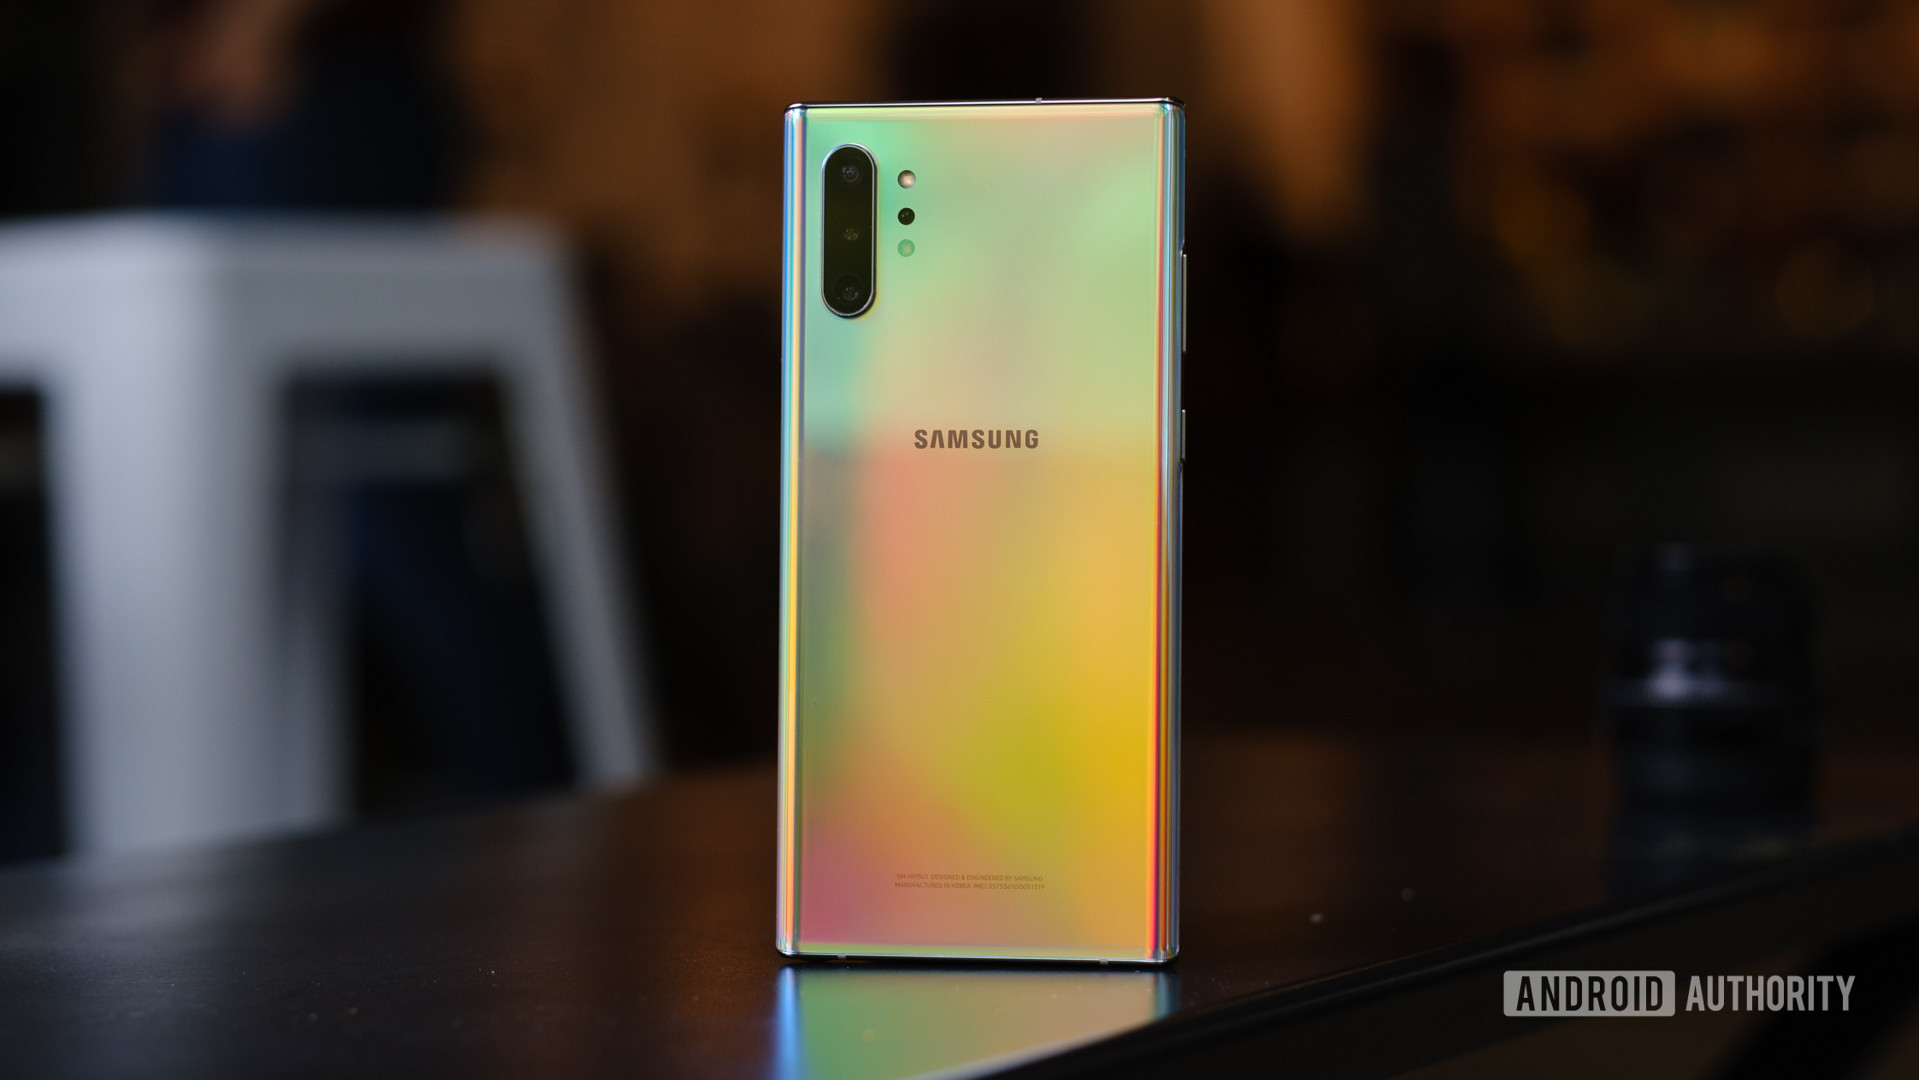 Samsung Galaxy Note 10 Plus Long-Term Review: Worth It In 2020?